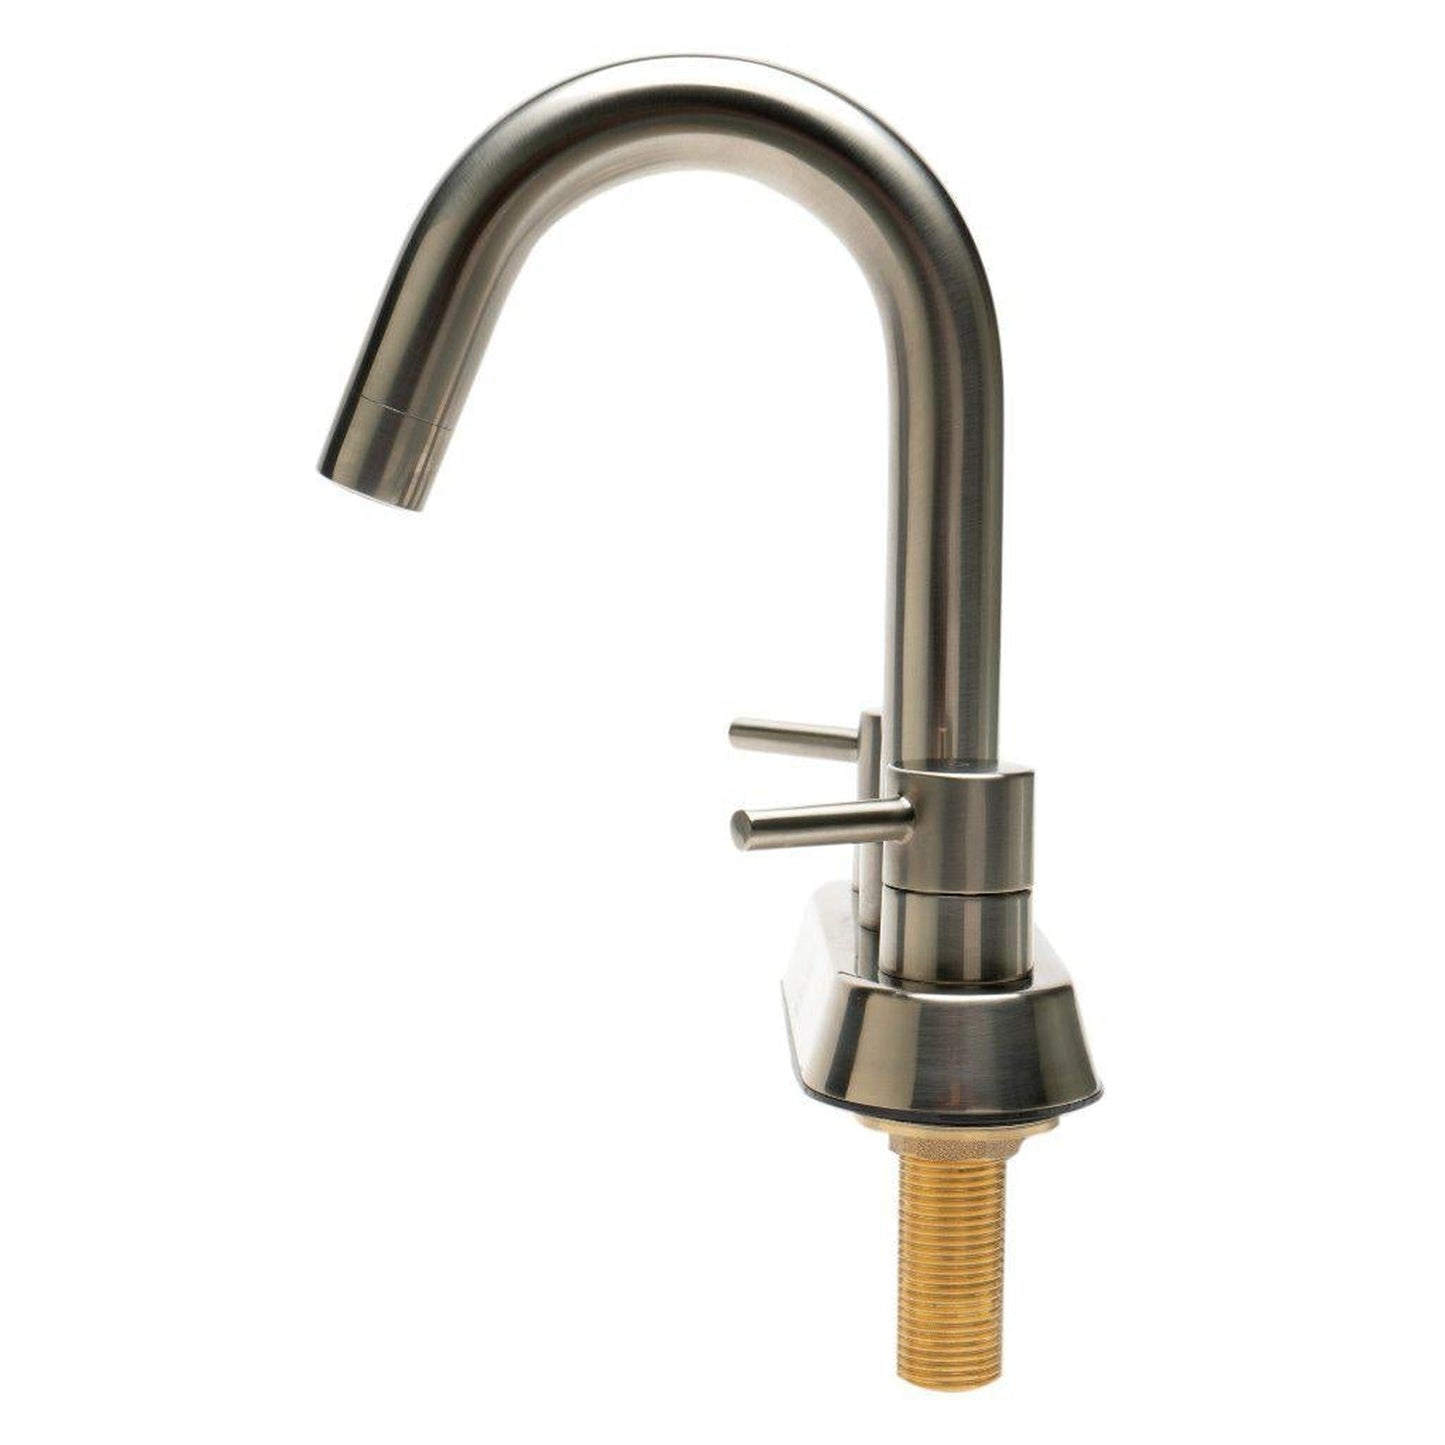 ALFI Brand AB1400-BN Brushed Nickel Centerset Gooseneck Spout Brass Bathroom Sink Faucet With Two Lever Handles